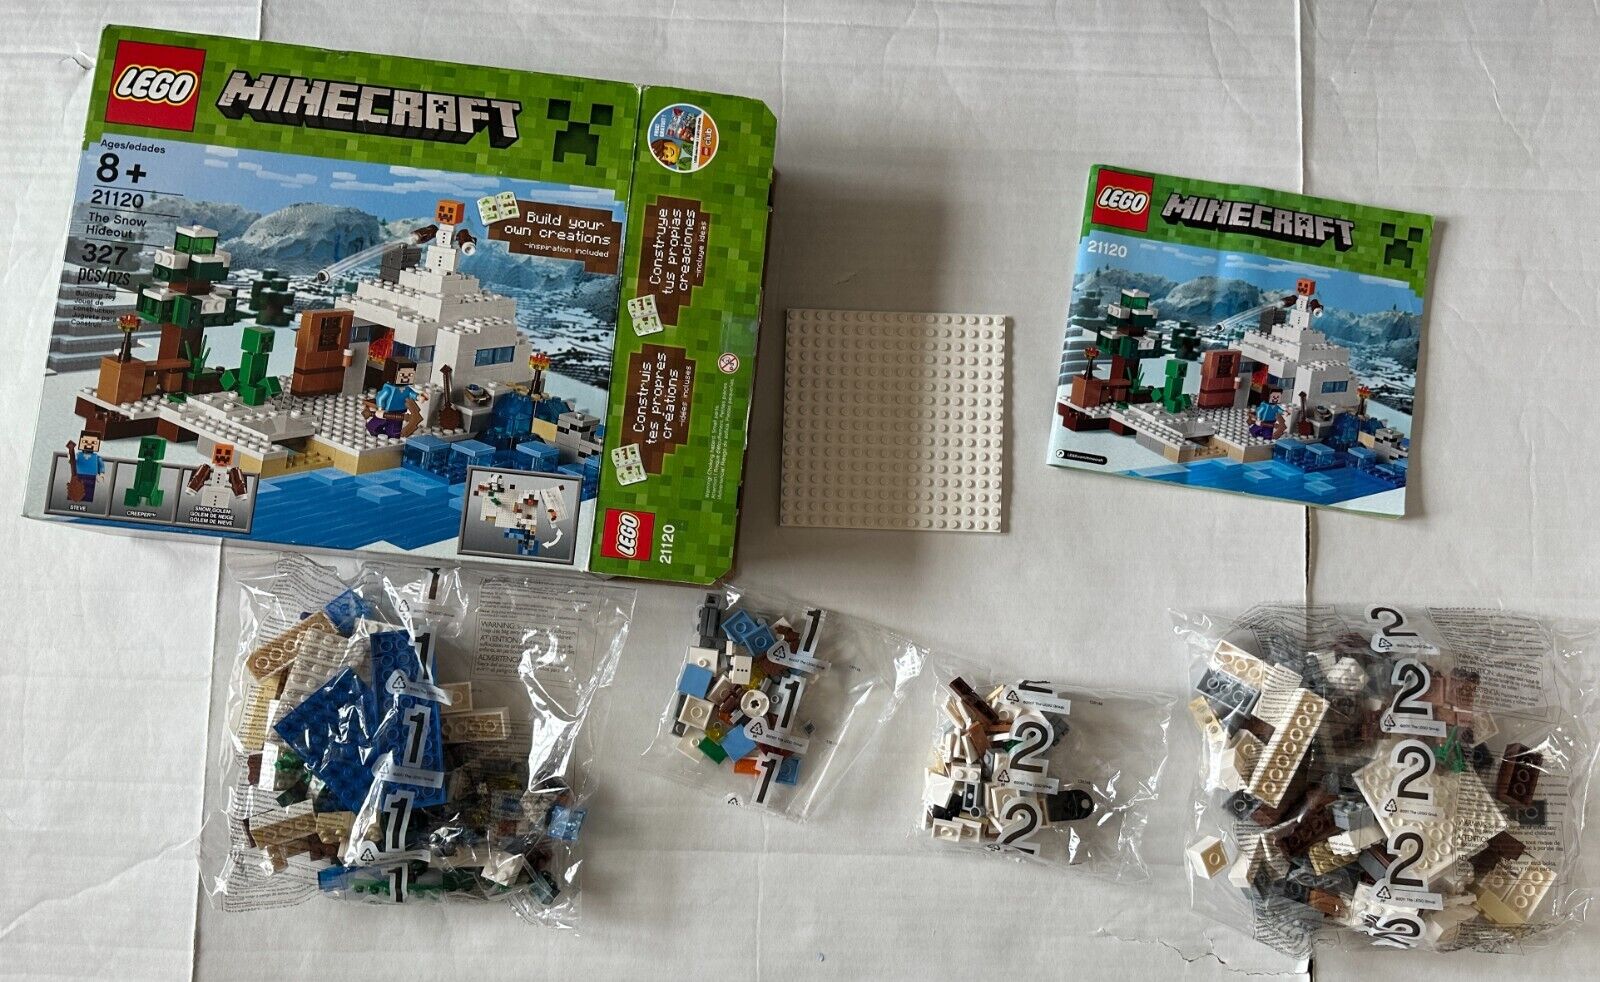 Lego Minecraft: Snow Hideout (21120) Open Box, Sealed Bags